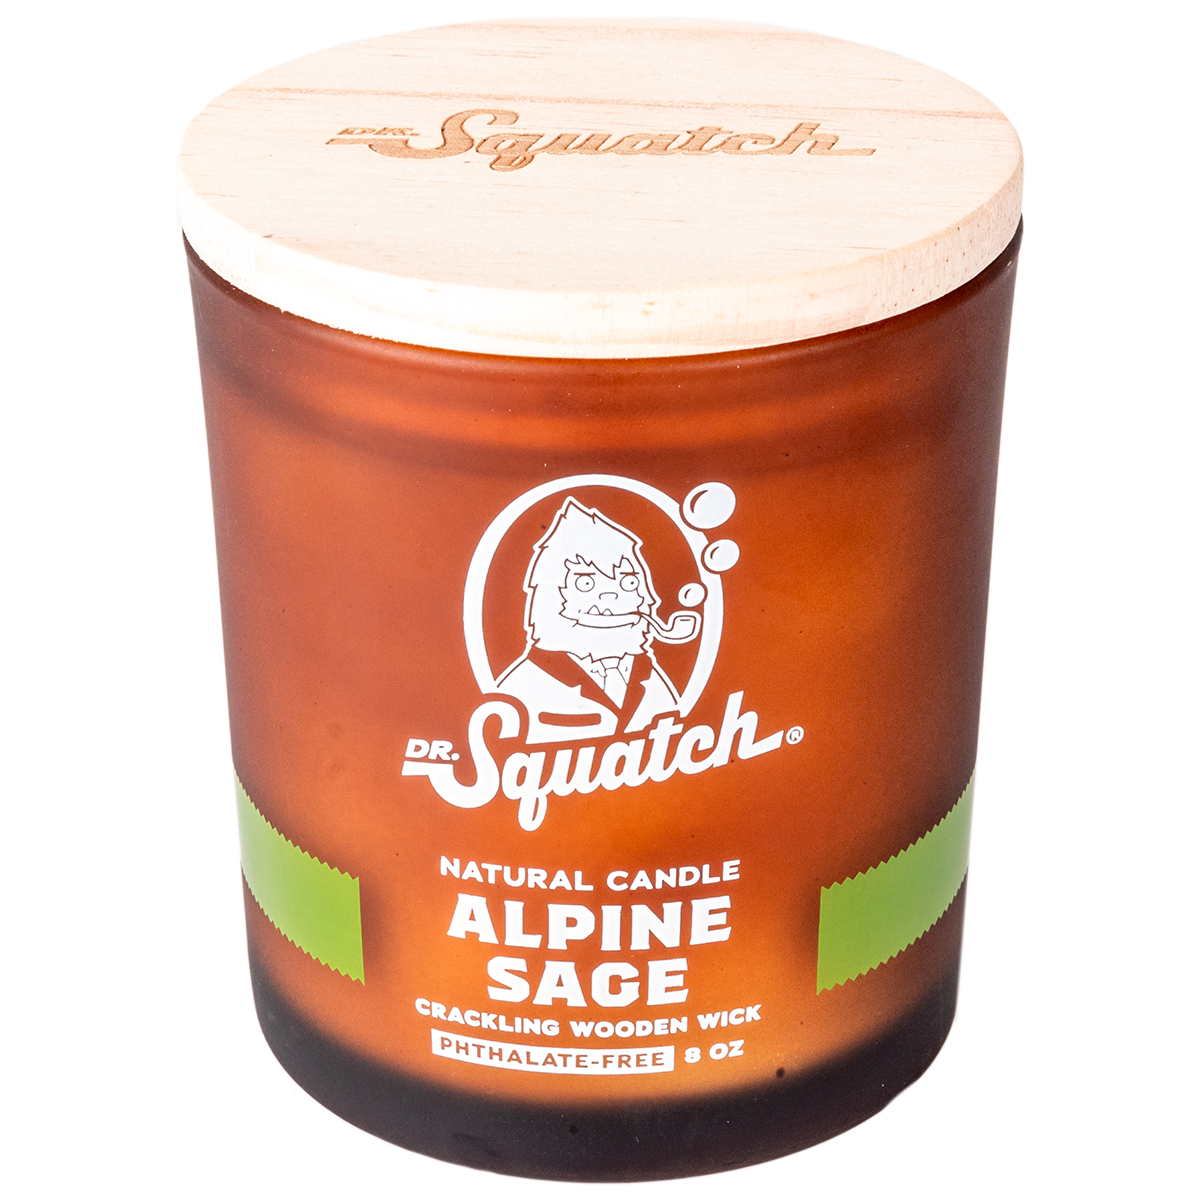 Dr. Squatch's Alpine Sage UPDATED Review 